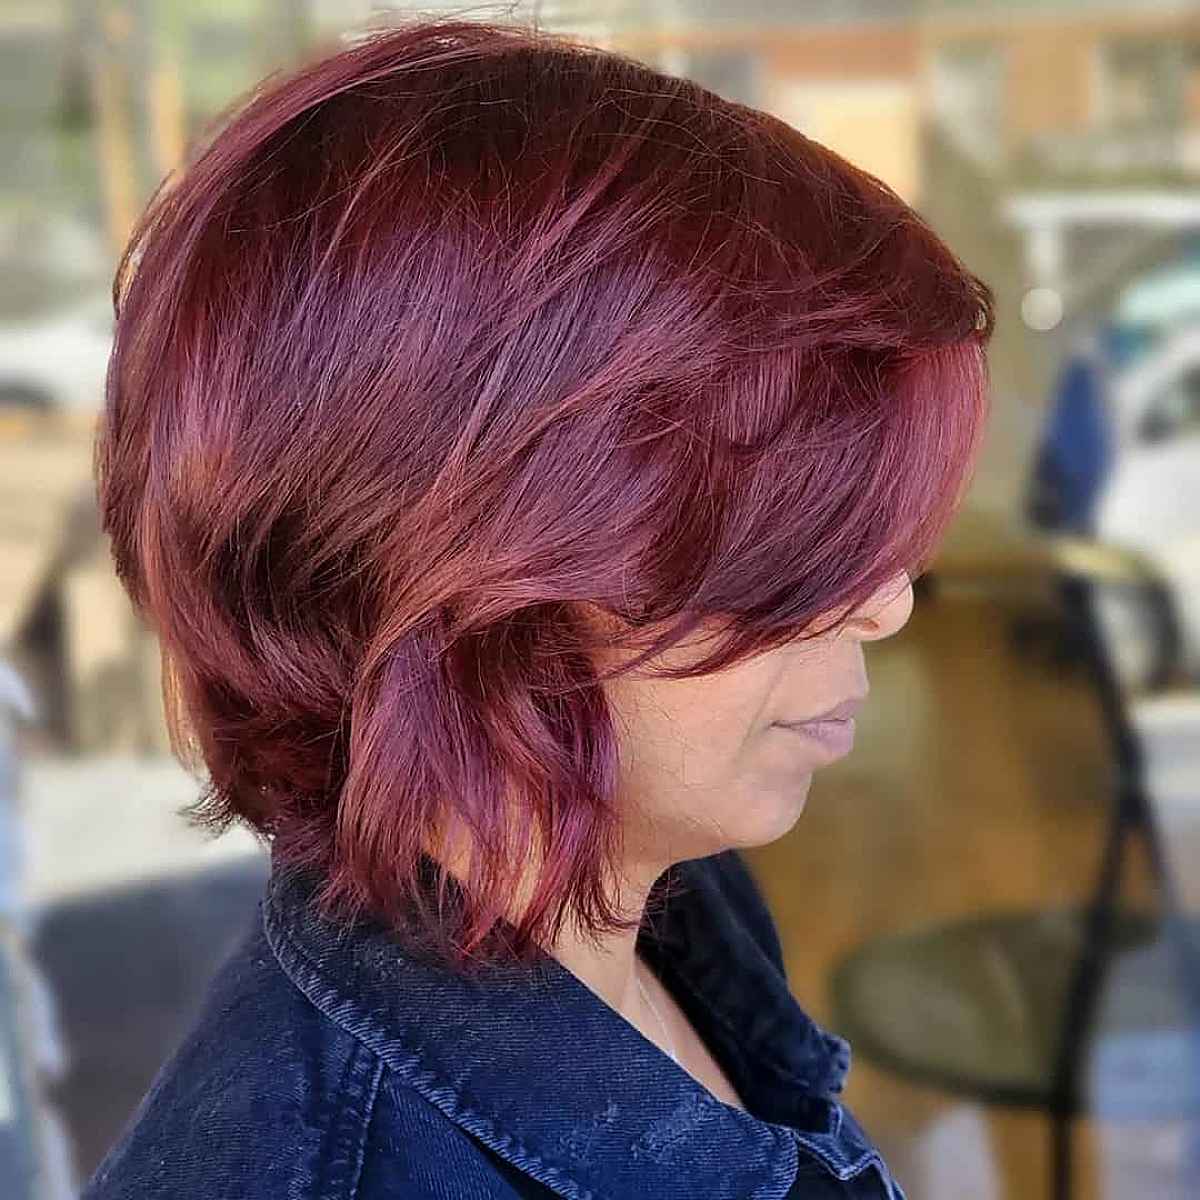 Top 10 Fall Hair Colors for Women Over 40 in 2021